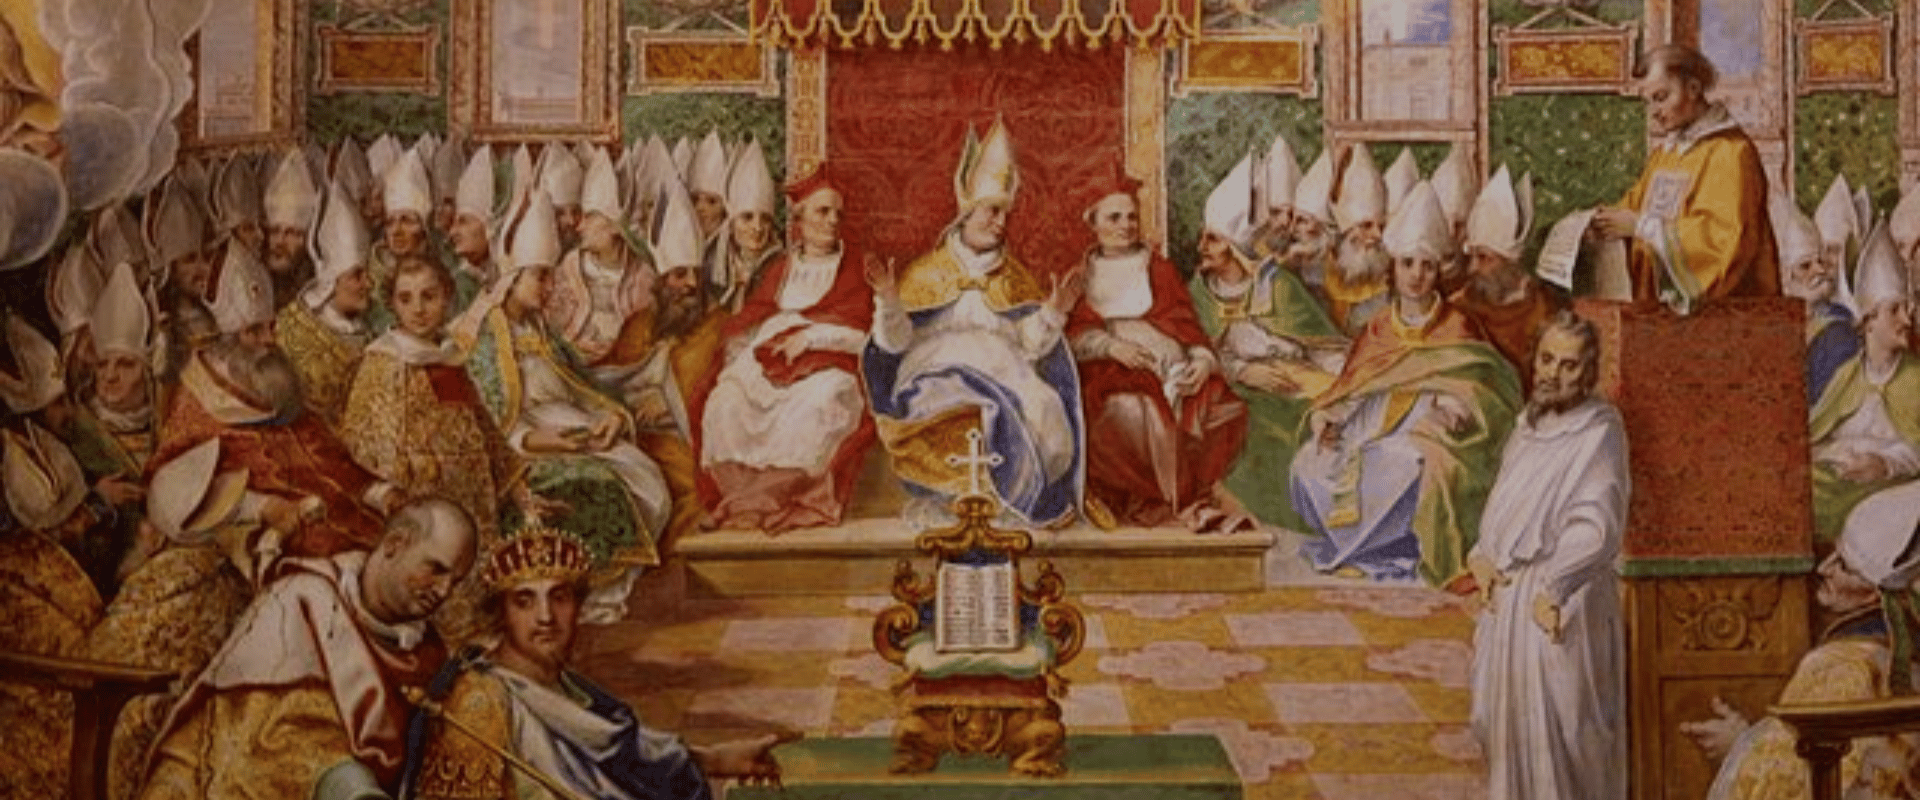 What was the main purpose of the Council of Nicaea